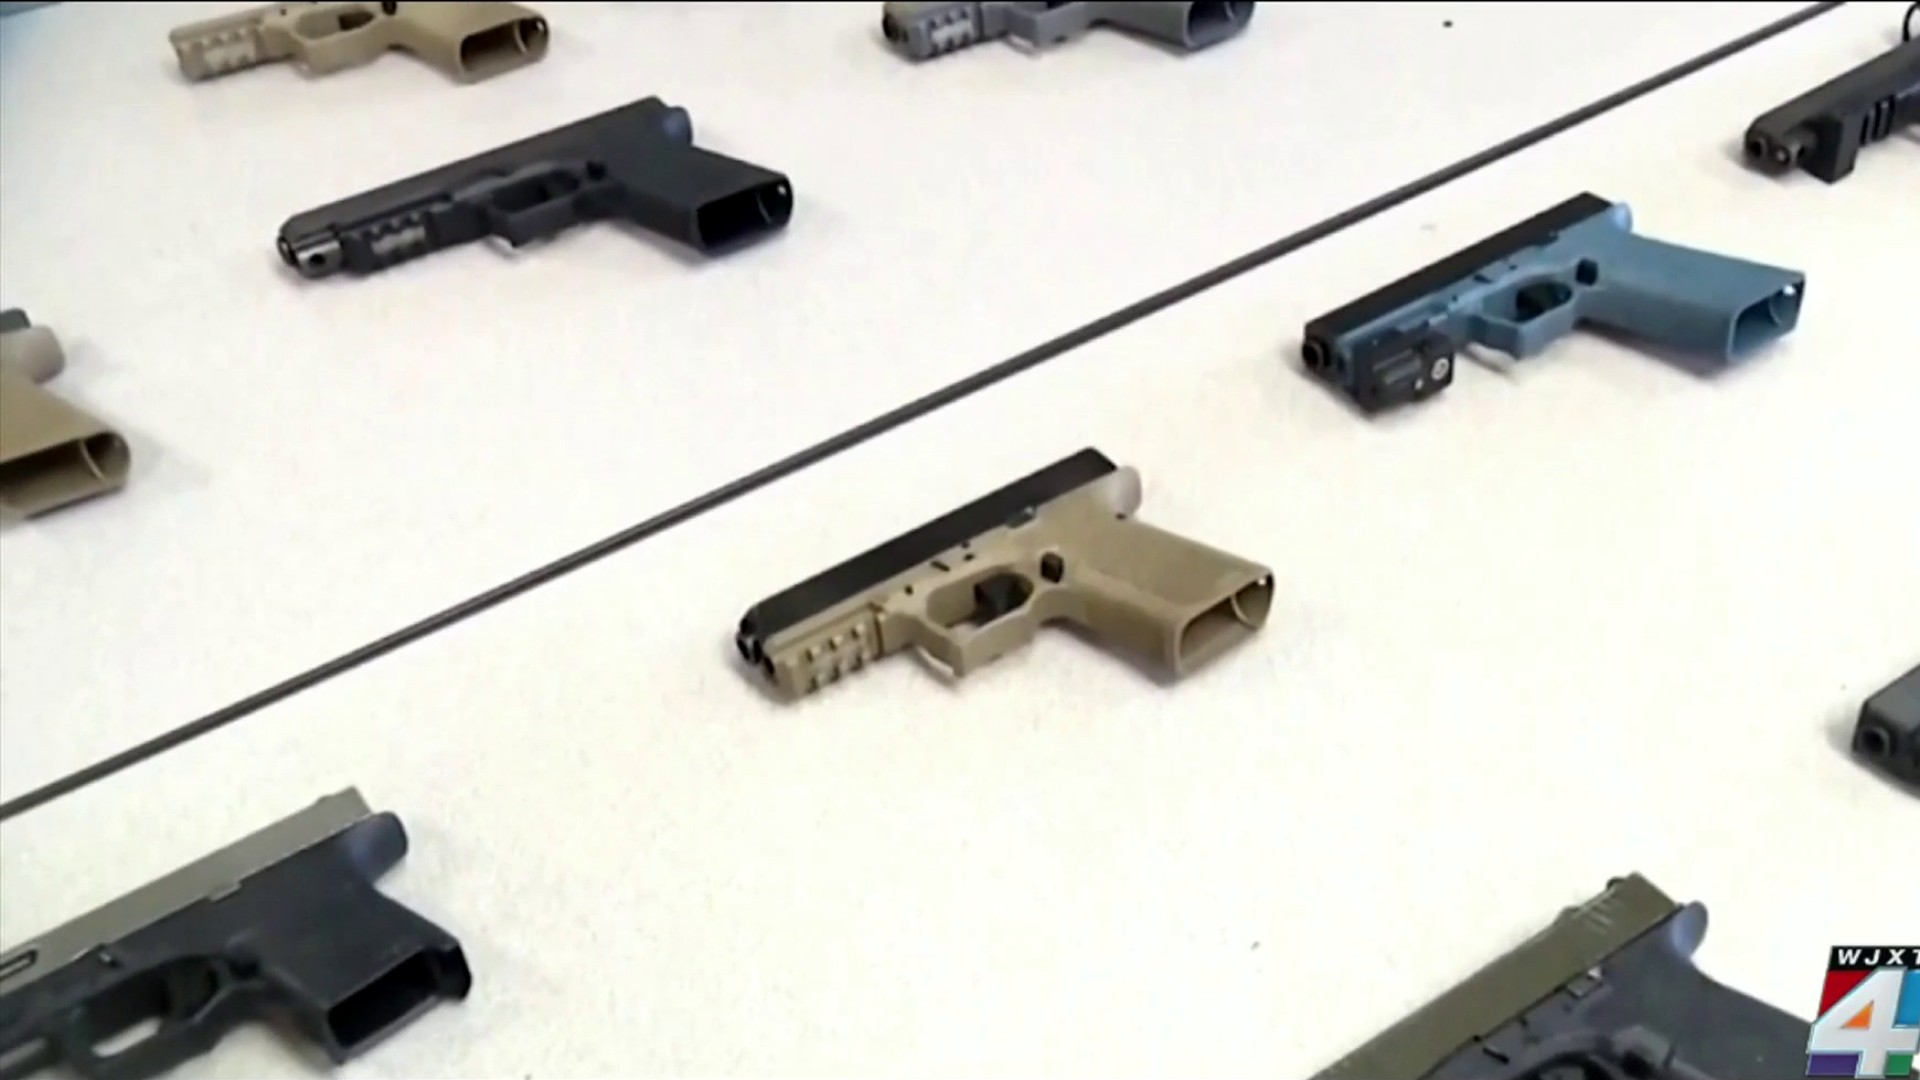 Florida lawmakers propose bill to allow carry concealed weapons without licenses